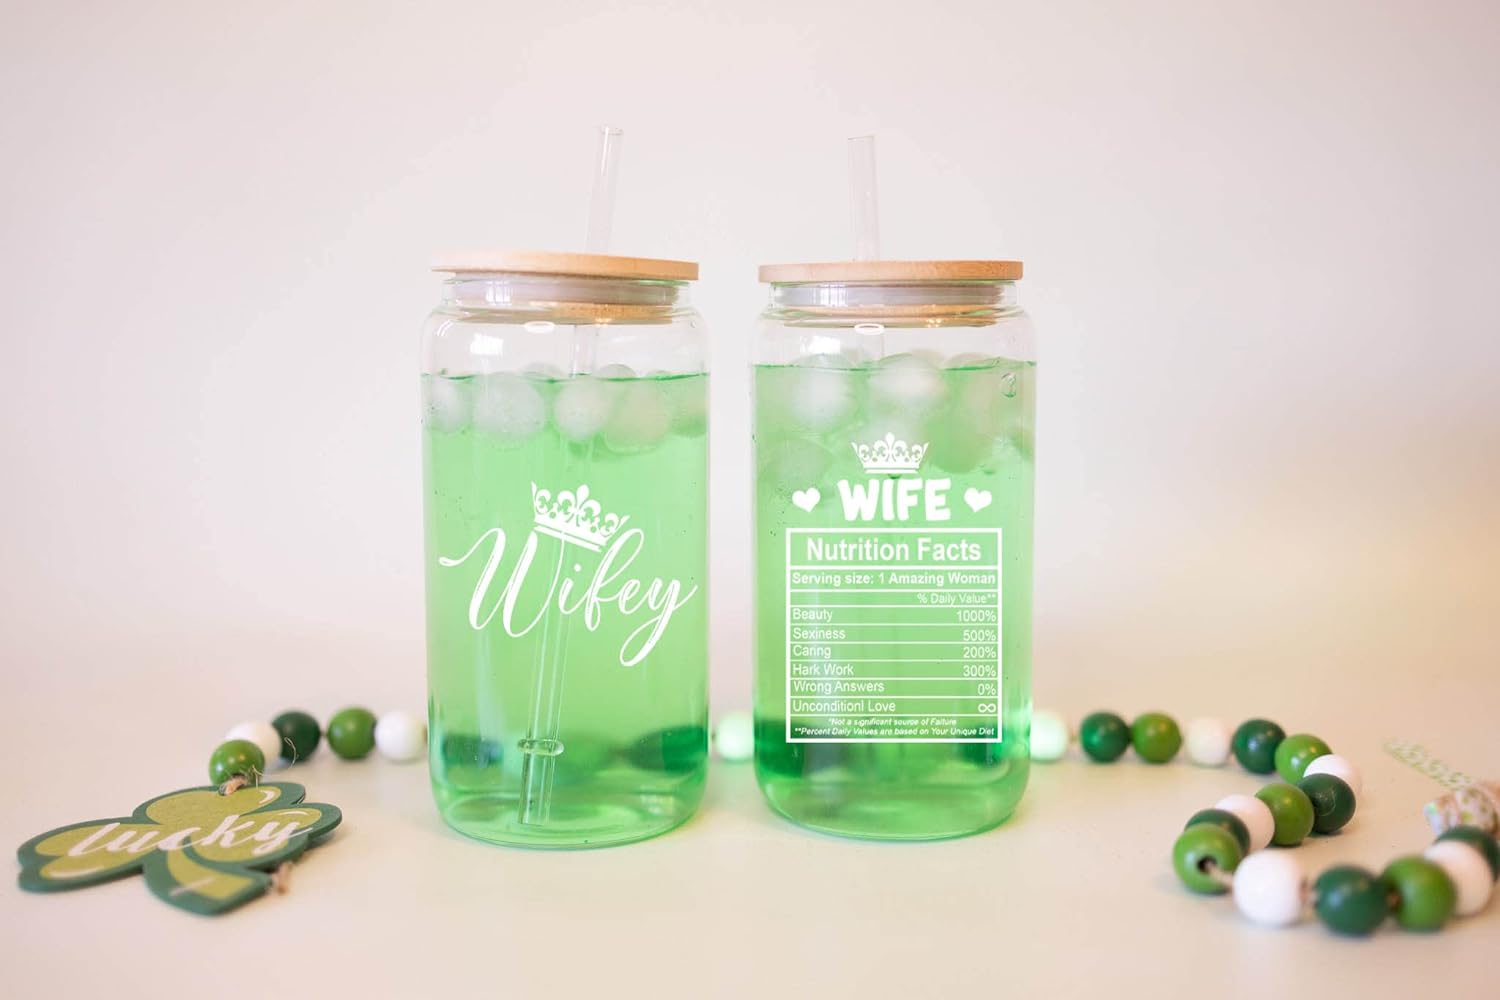 Gifts for Wife from Husband - Wife Gifts - Valentine's Day, Wedding Anniversary, Birthday Gifts for Wife, Mothers Day Gifts for Wife - Funny I Love You Gifts for Her, Romantic Gifts for Her - 16 Oz Wife Glass Drinking